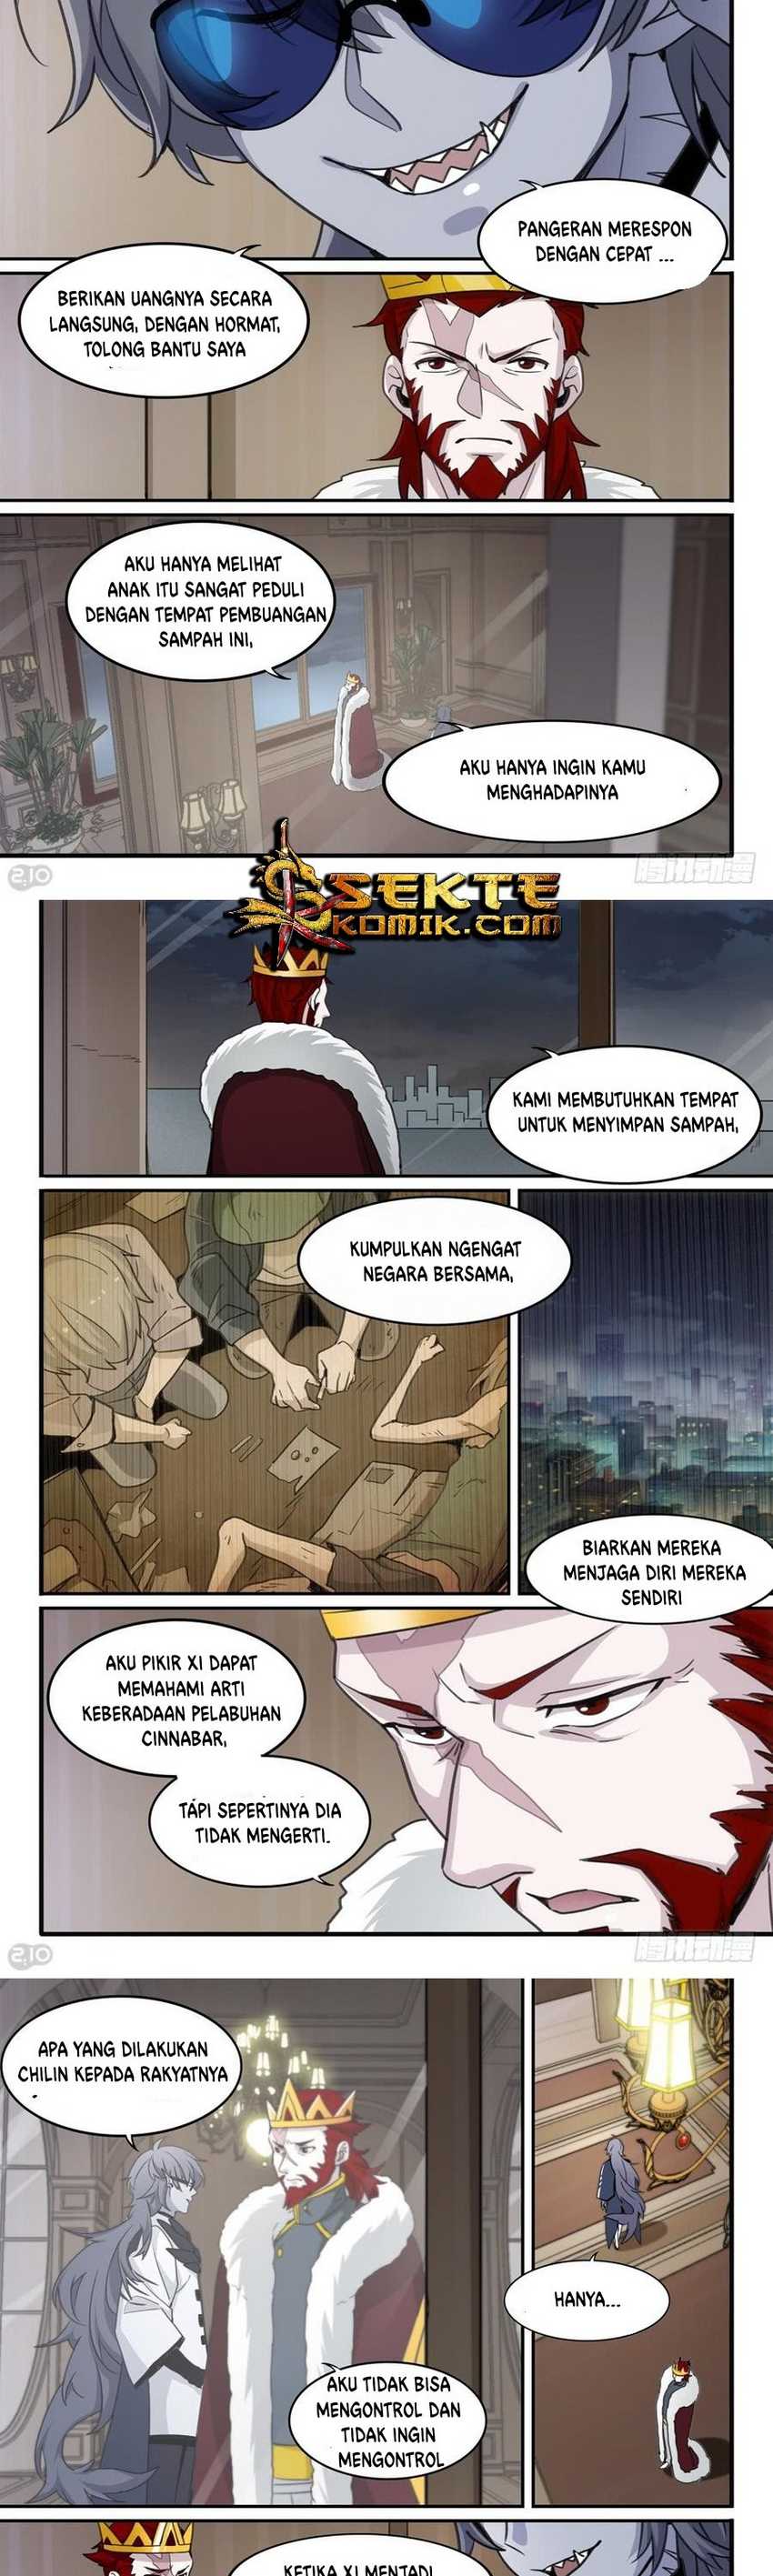 The Reborn Chapter 94